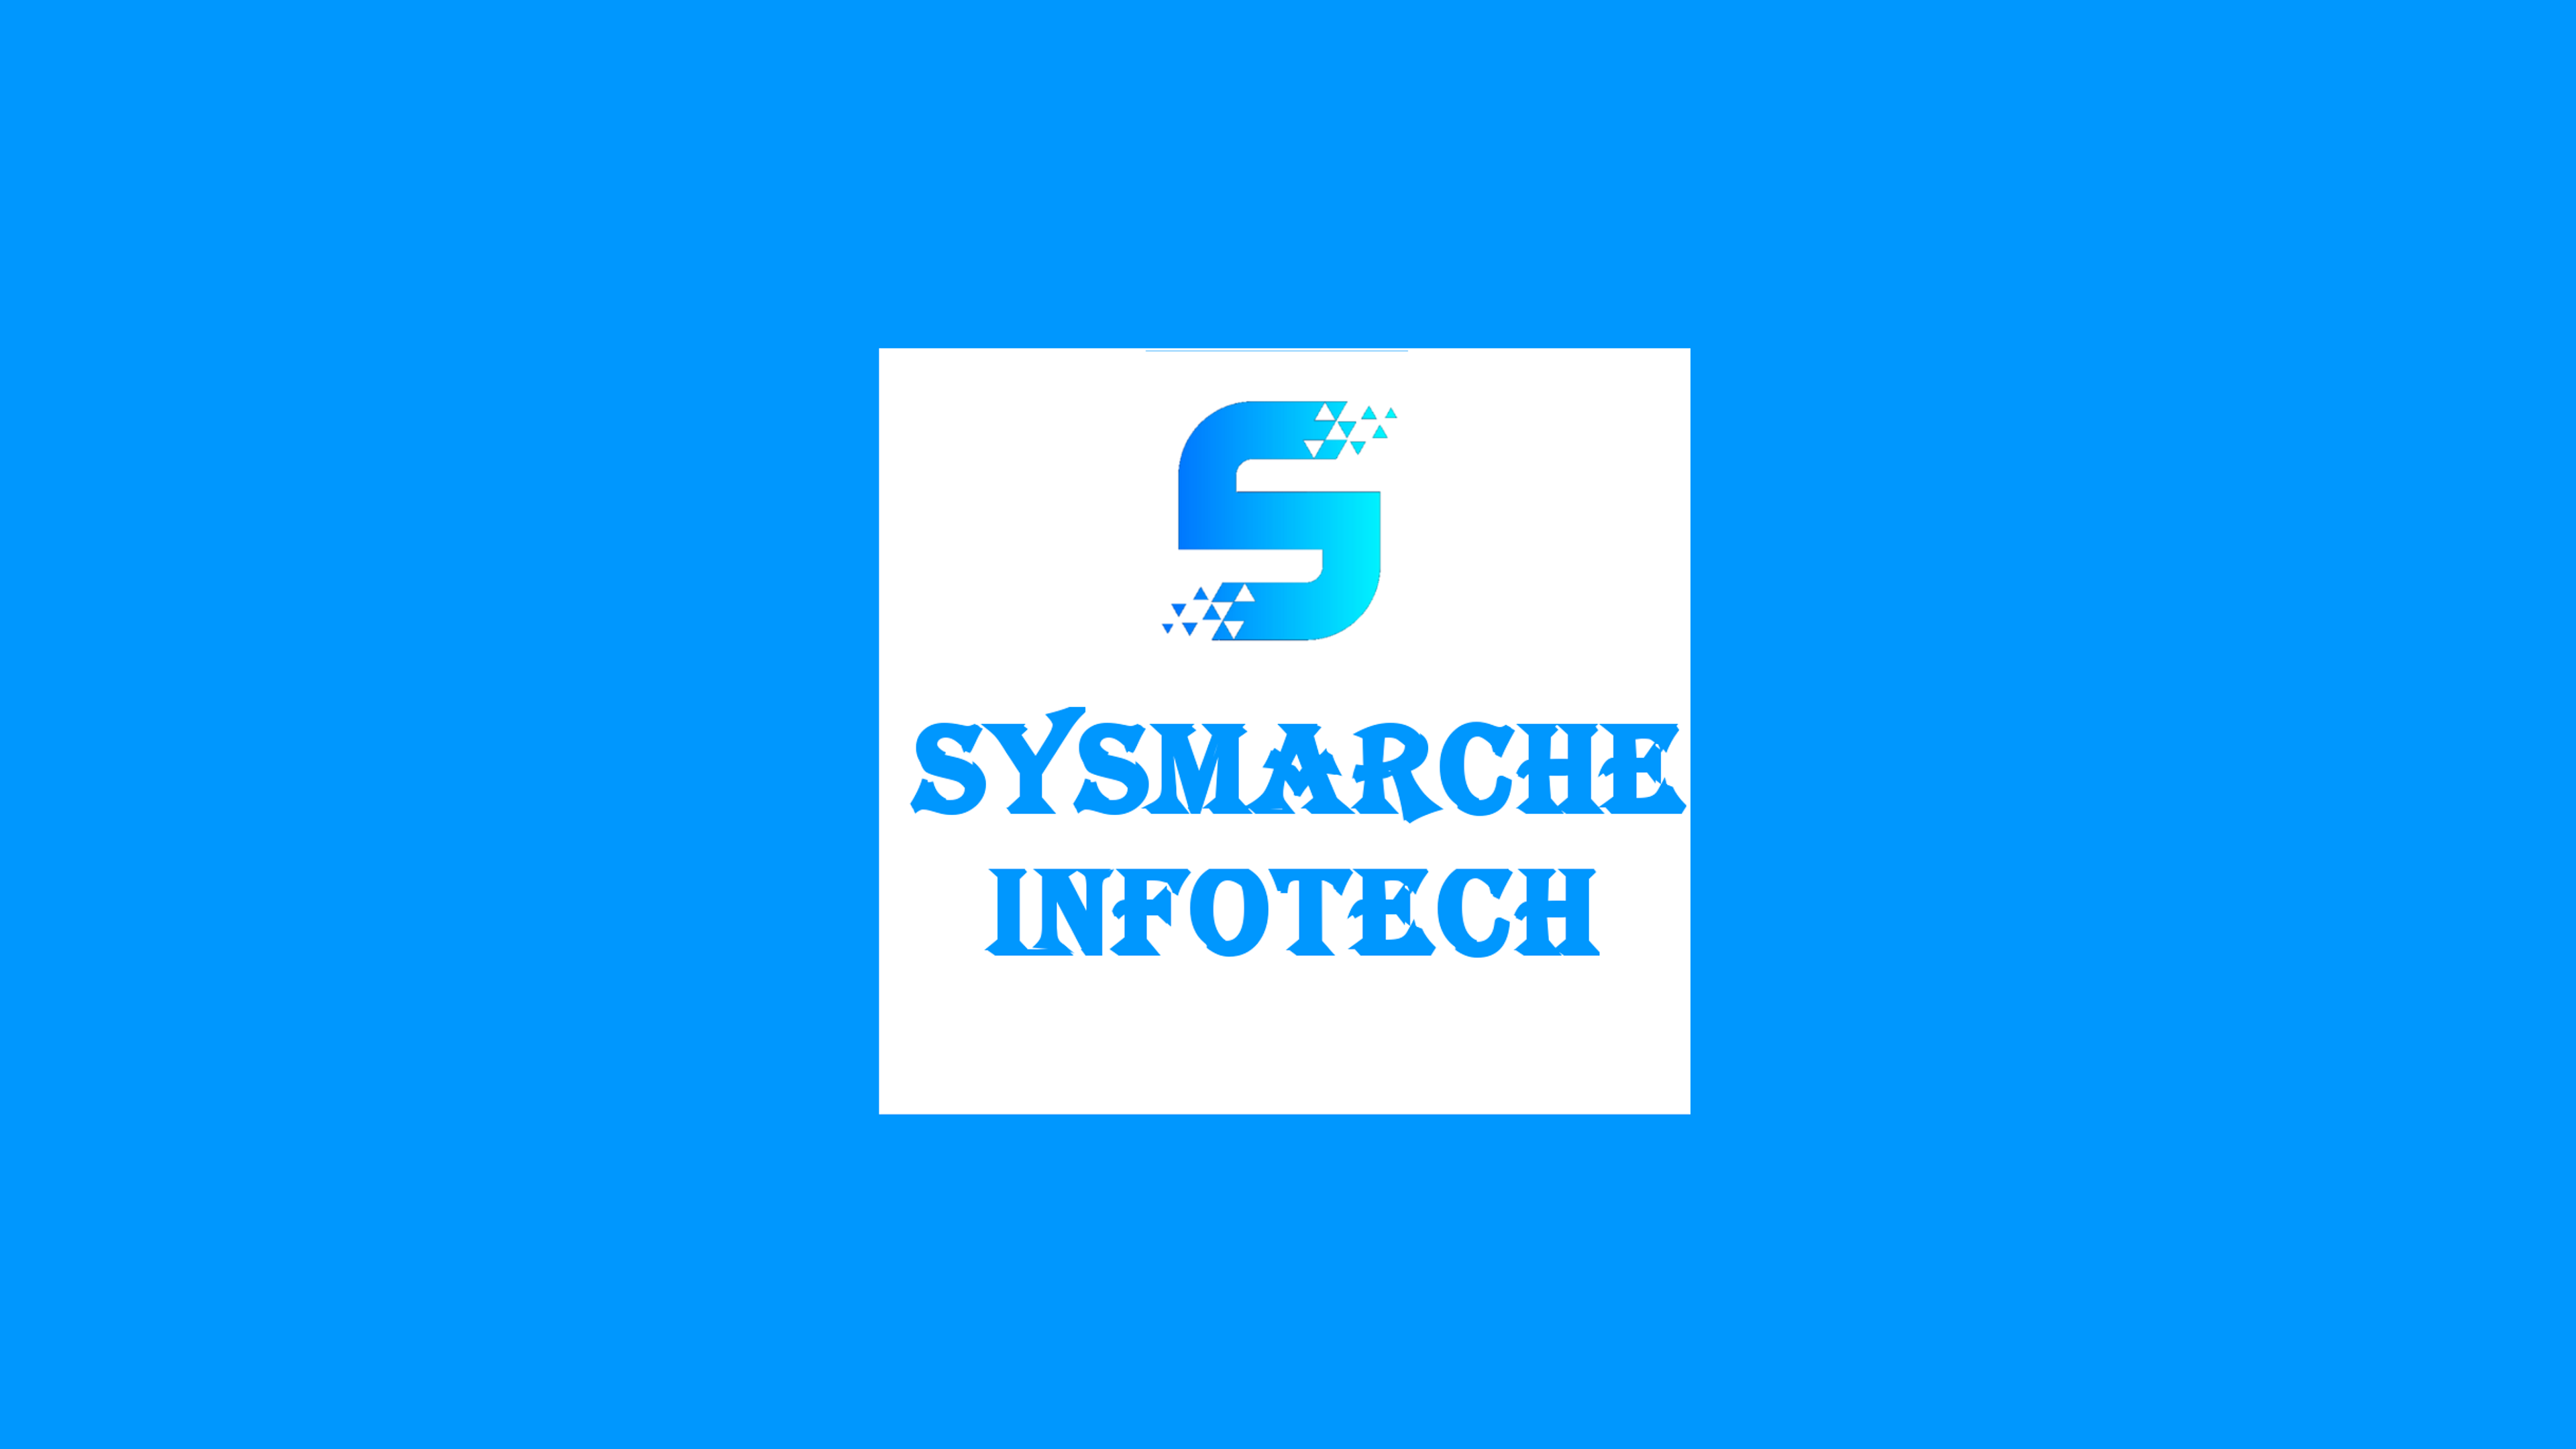 Android Apps by Sysmarche Infotech - Google Play